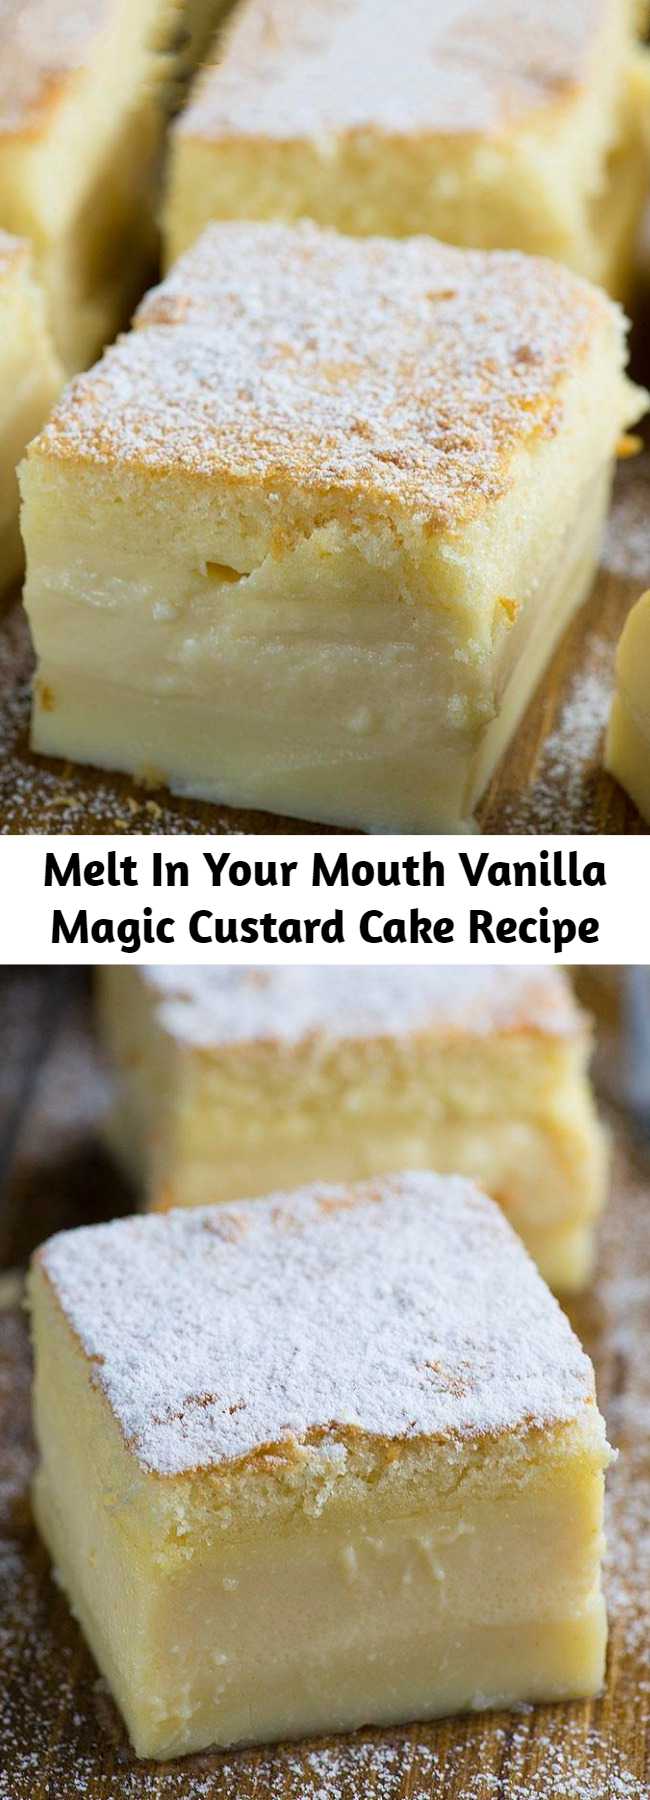 Melt In Your Mouth Vanilla Magic Custard Cake Recipe - Vanilla Magic Custard Cake is melt-in-your-mouth soft and creamy. You have to try this delicious, triple layered cake. A custard-like vanilla filling separates a light, fluffy layer on top and a dense cake layer on the bottom, to create the ultimate vanilla cake recipe! #magiccake #custardcake #vanillacake #custard #cakerecipe